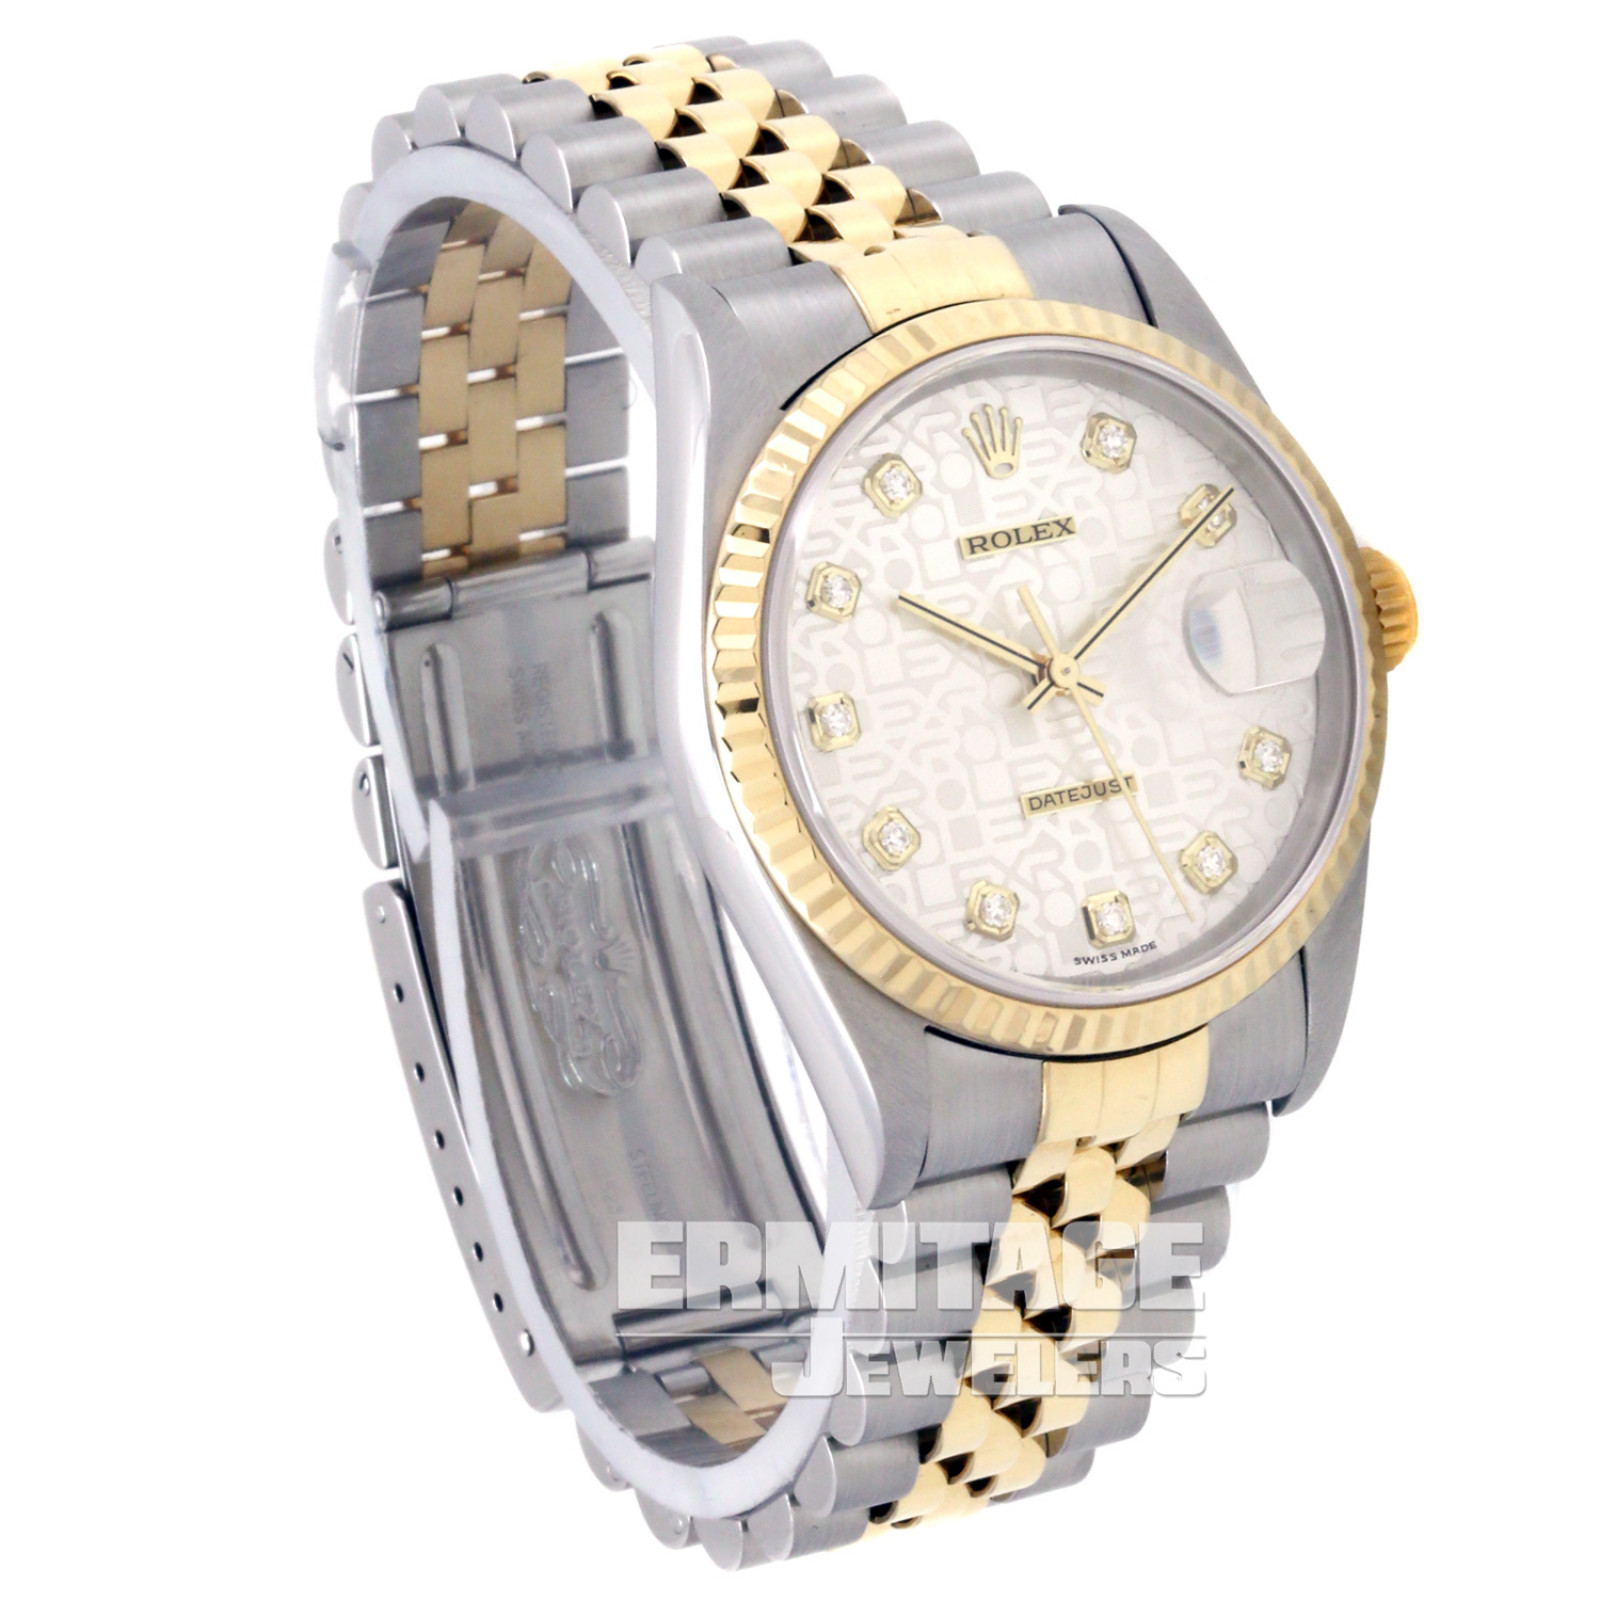 Selling Rolex Datejust 16233 36 mm Pre-Owned